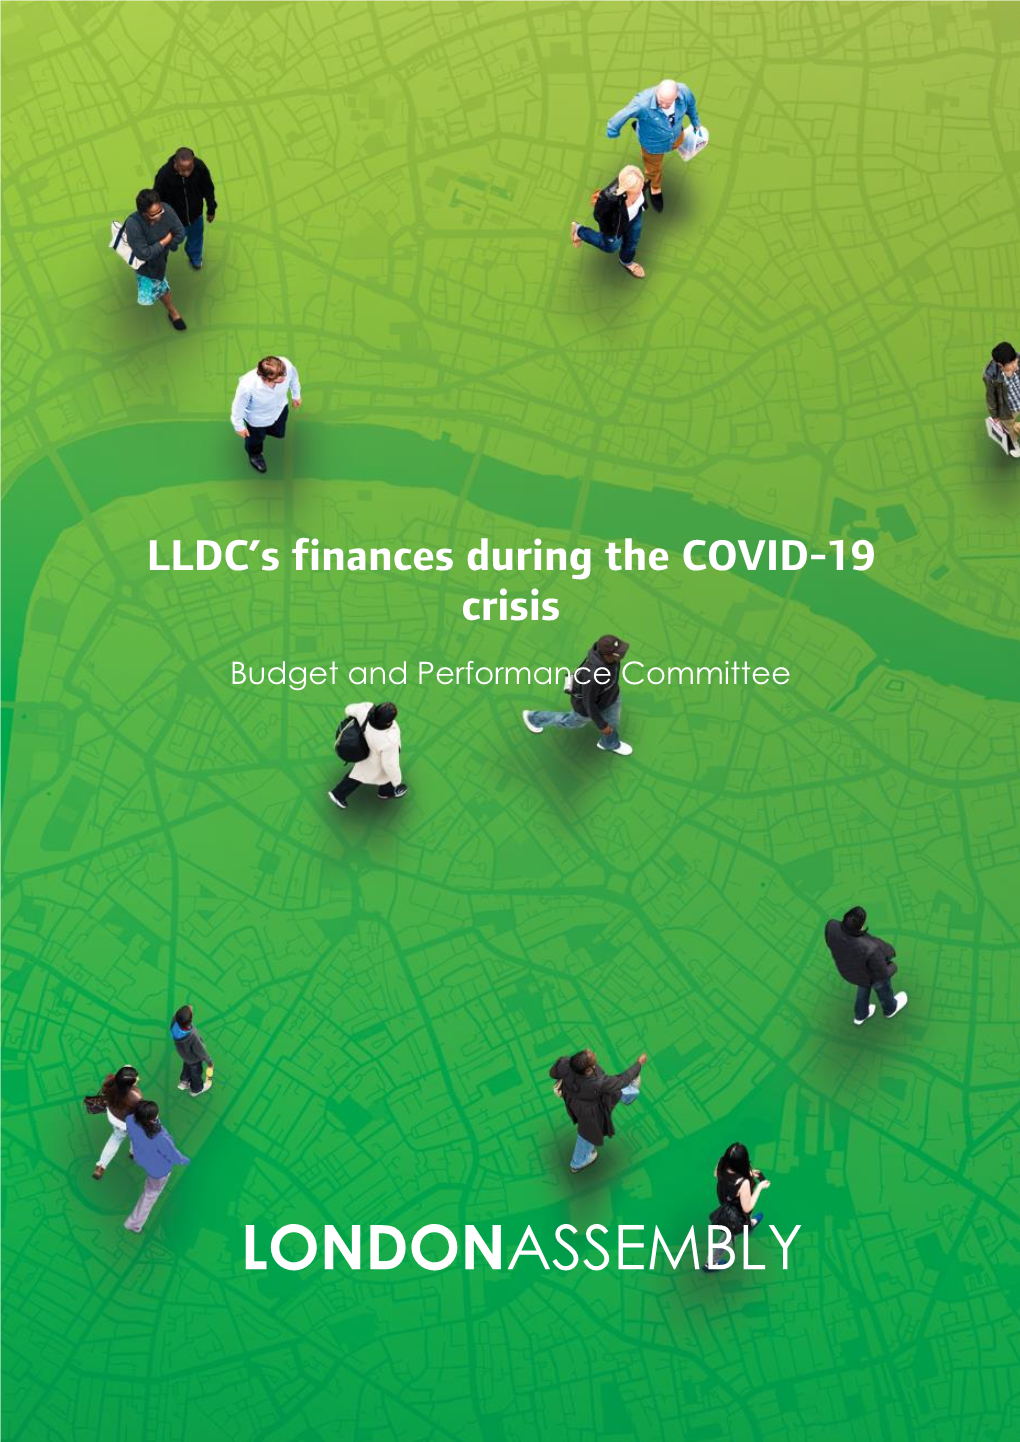 LLDC's Finances During the COVID-19 Crisis